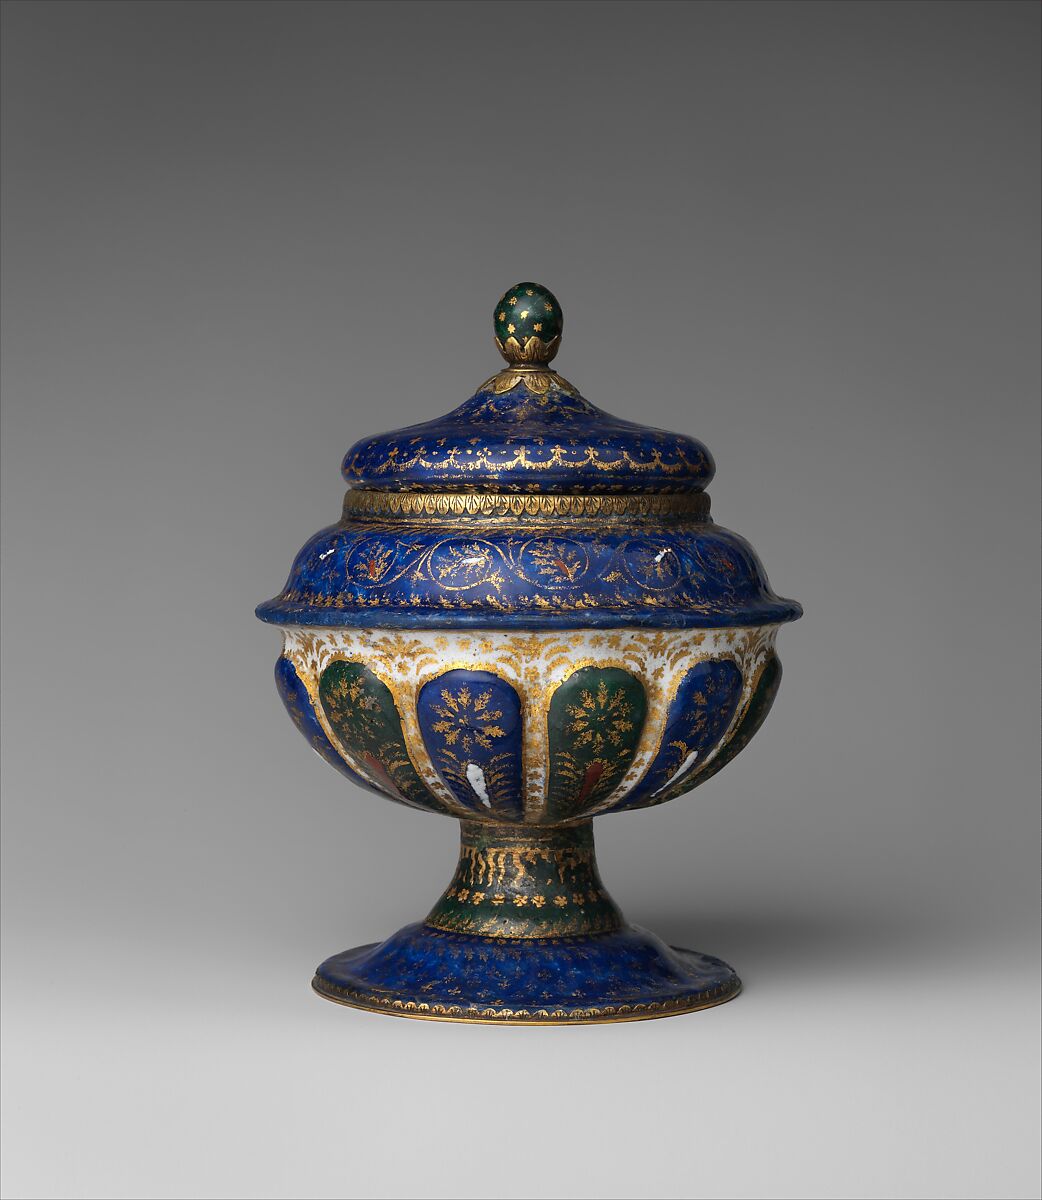 Cup with cover, Painted enamel on copper, partly gilt, Italian, Venice 